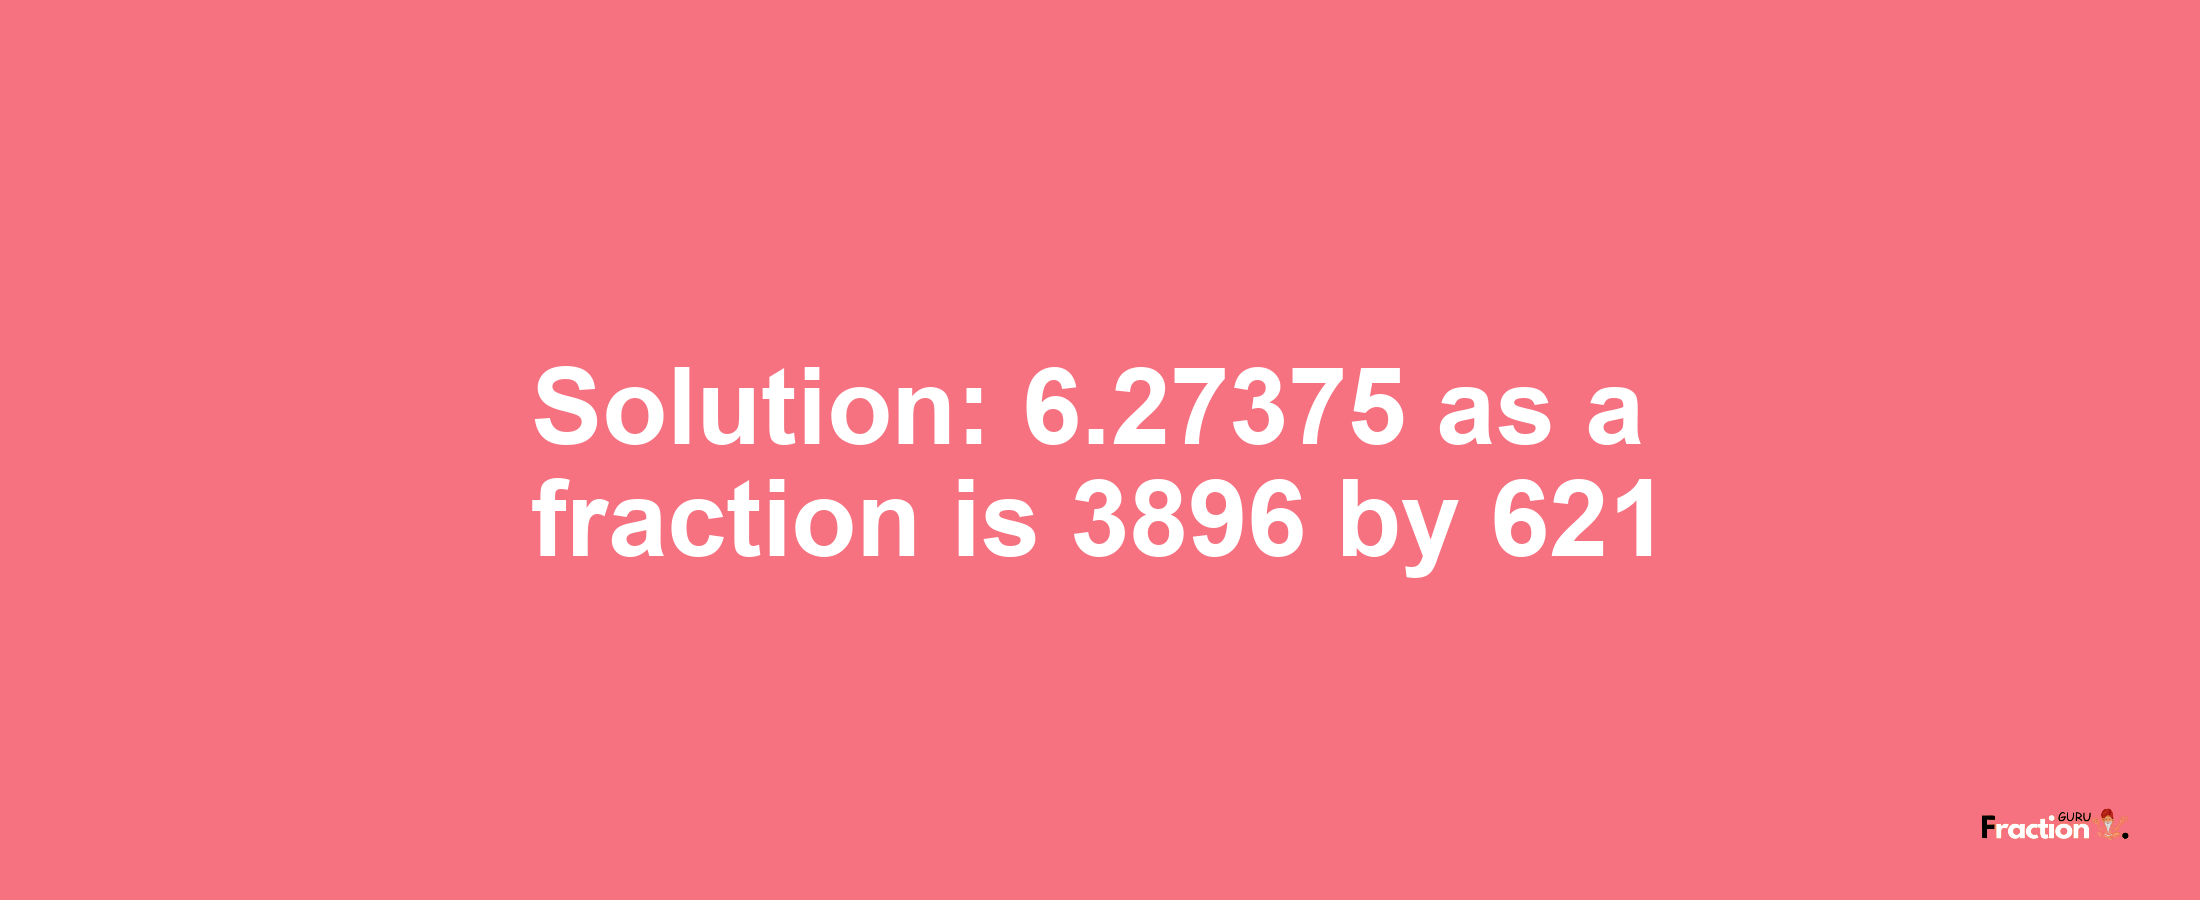 Solution:6.27375 as a fraction is 3896/621